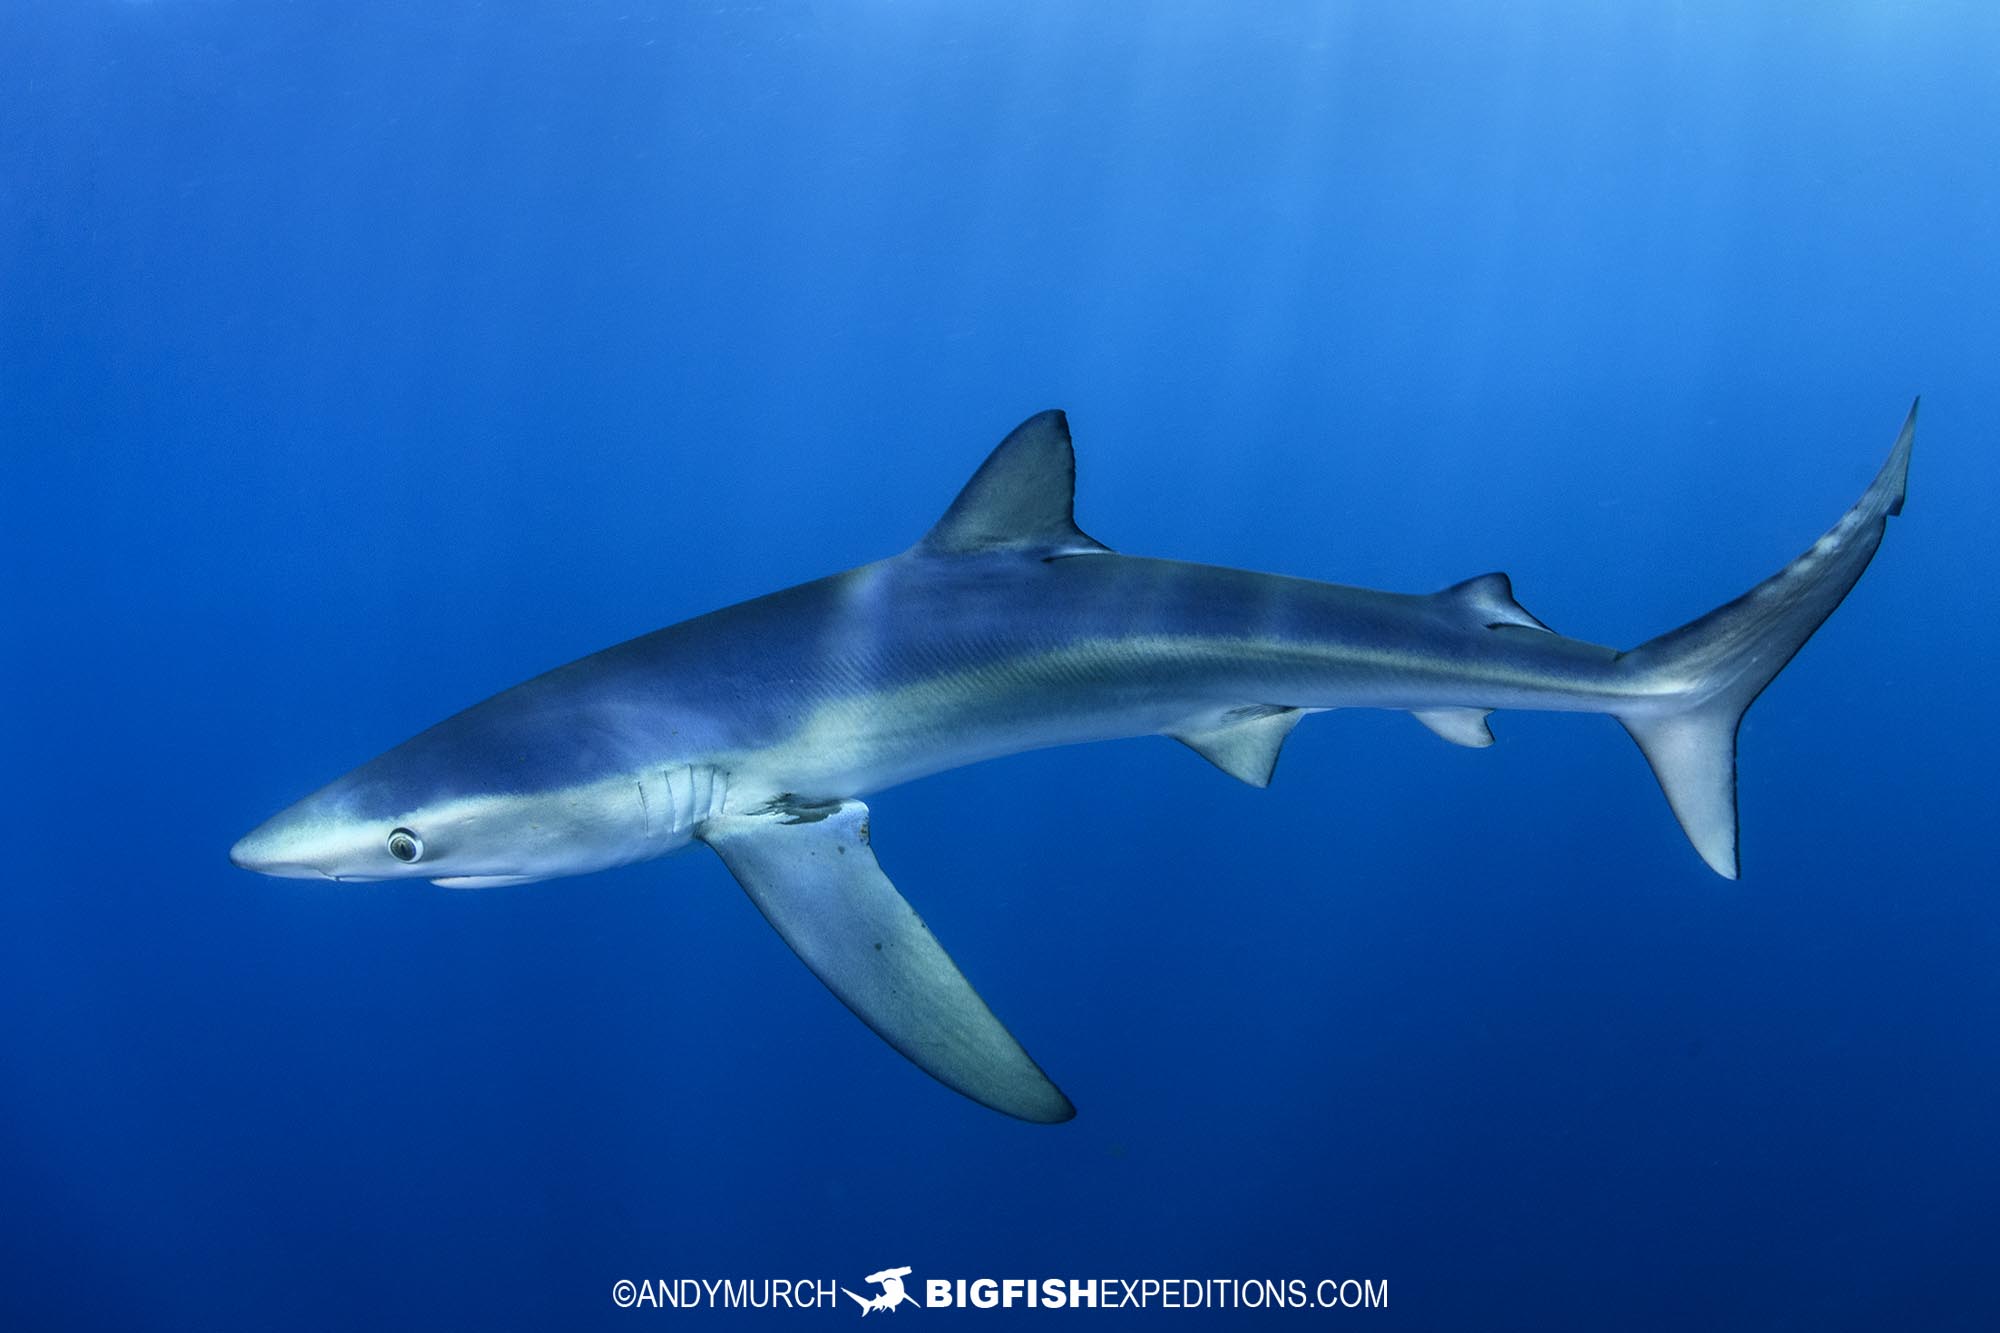 Snorkeling with blue and mako sharks in Mexico.